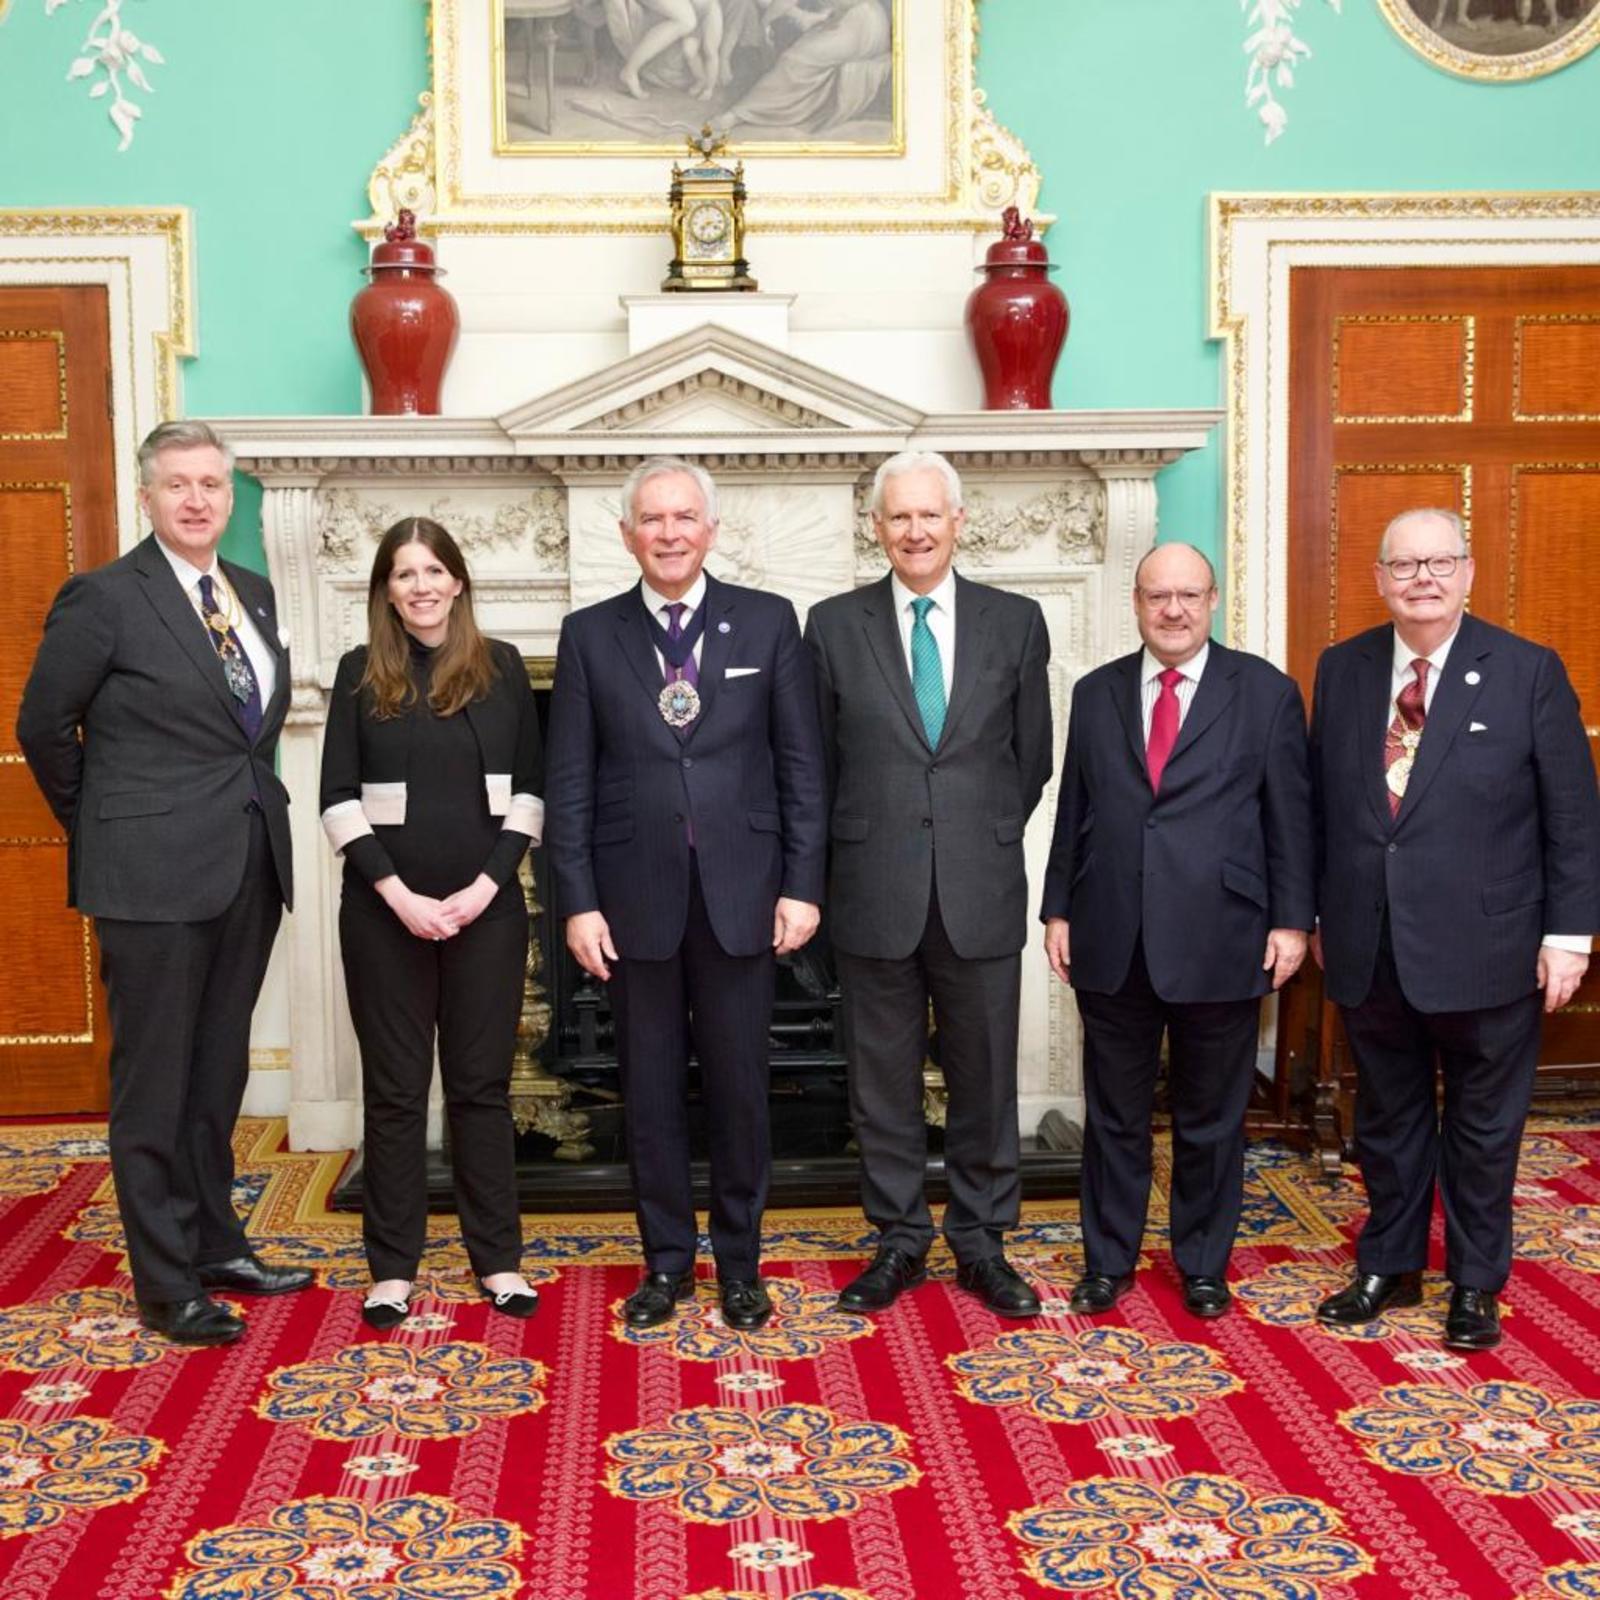 27 Mar 23 - A very stimulating evening was had by all who attended the City’s first Innovation and Technology Dinner at Mansion House. The glitterati of the technology world heard from Michelle Donelan the Minister for the newly created Department of Science, Innovation and Technology, who only 7 weeks into the post.